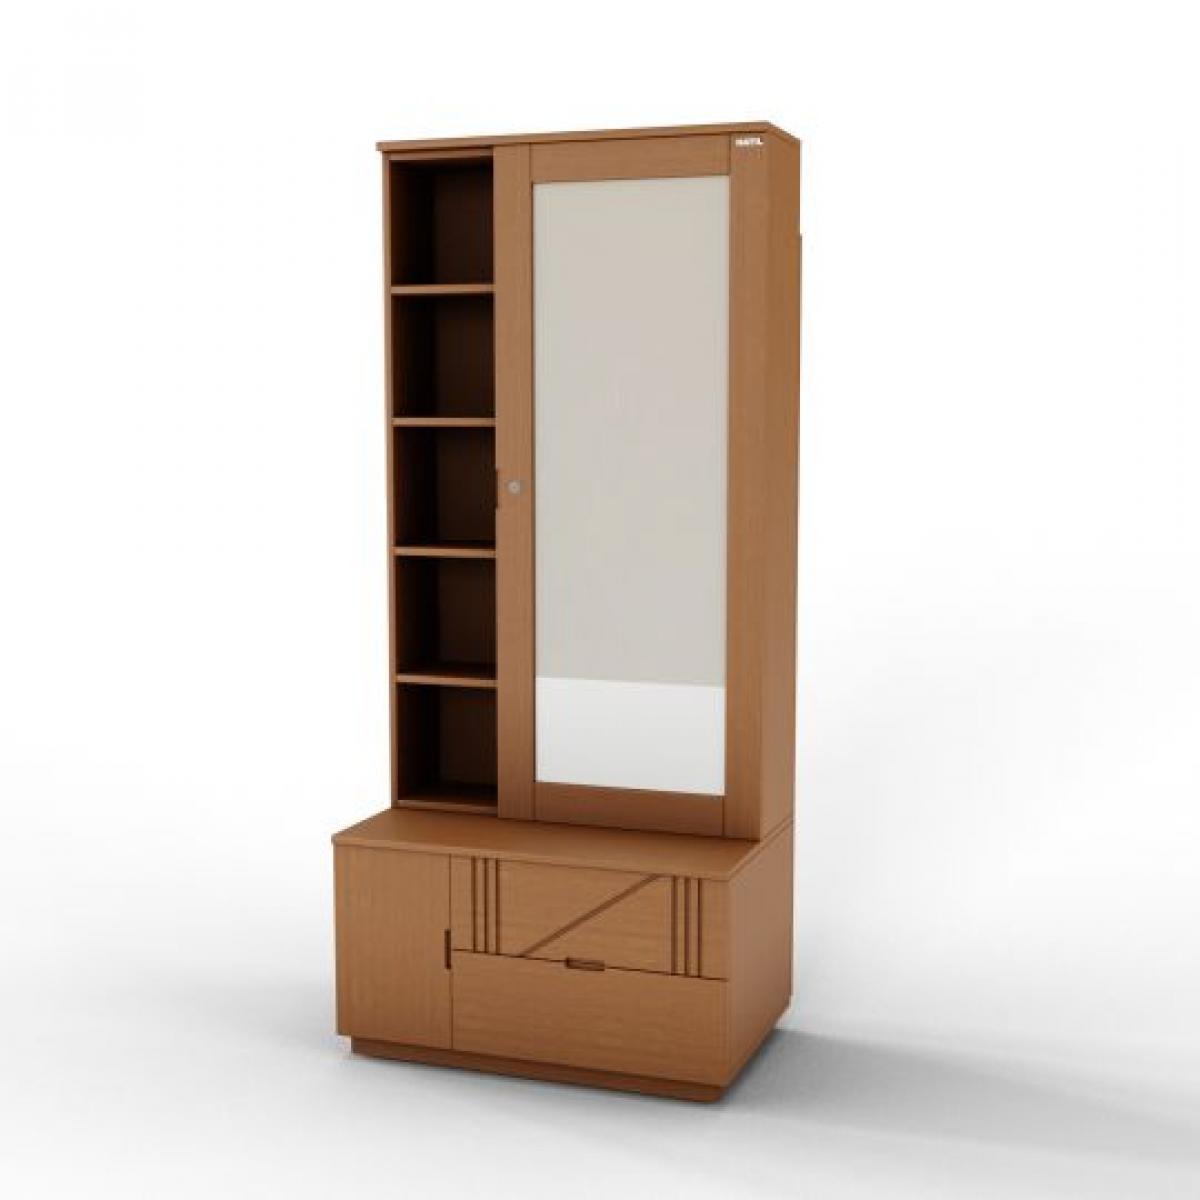 New dressing table online at wooden street | Modern dressing table designs,  Dressing table mirror design, Dressing table design